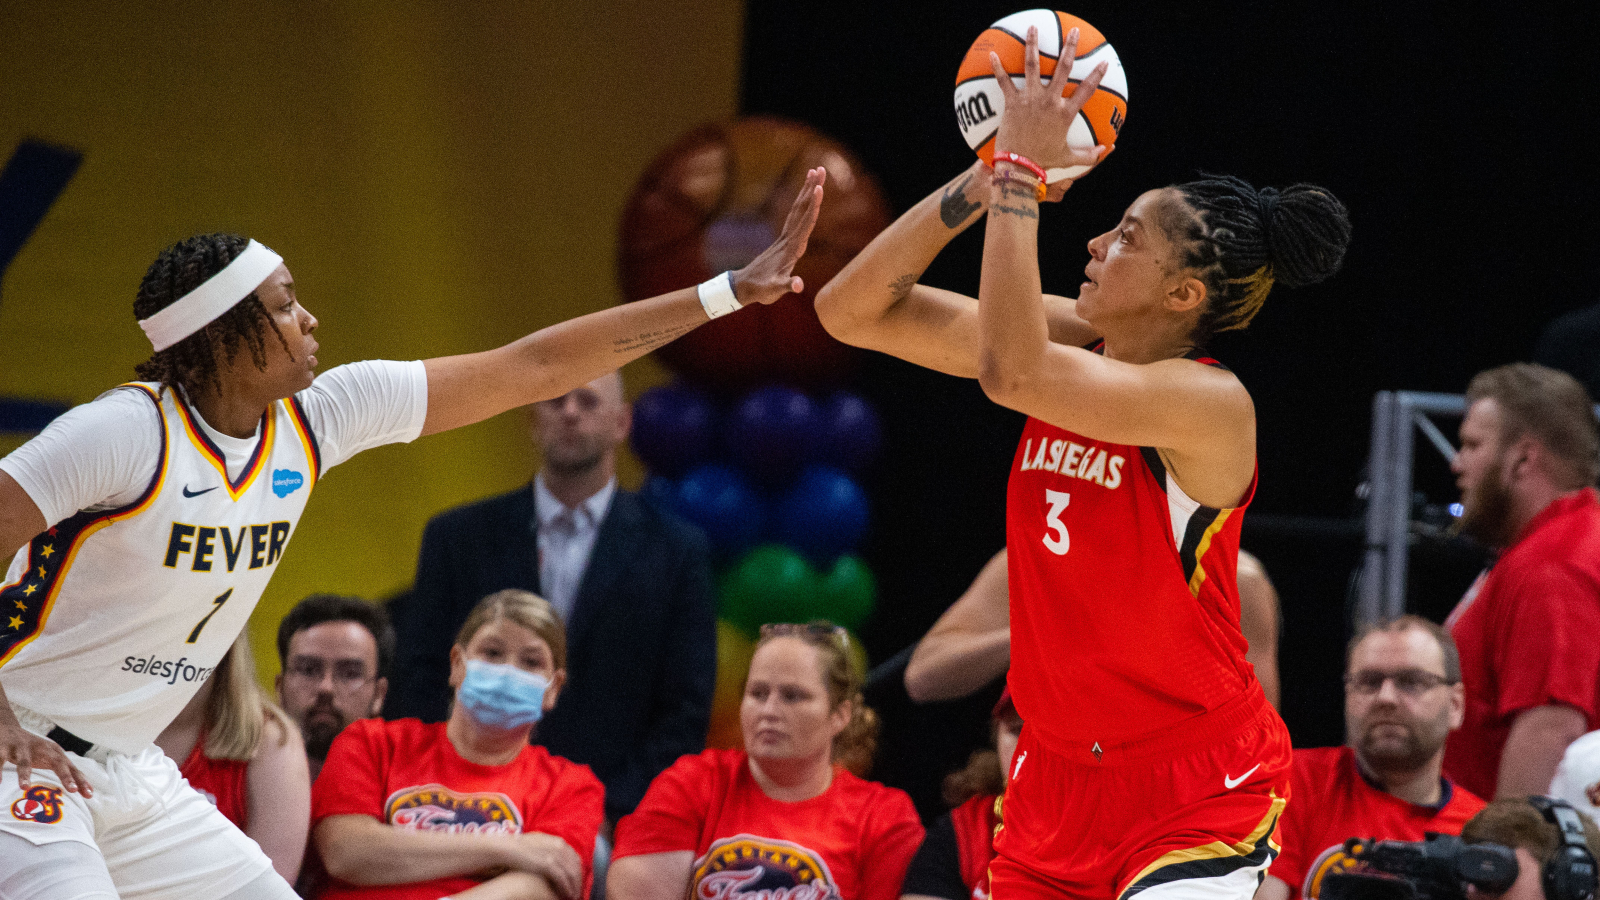 Aces' Candace Parker out indefinitely after undergoing foot